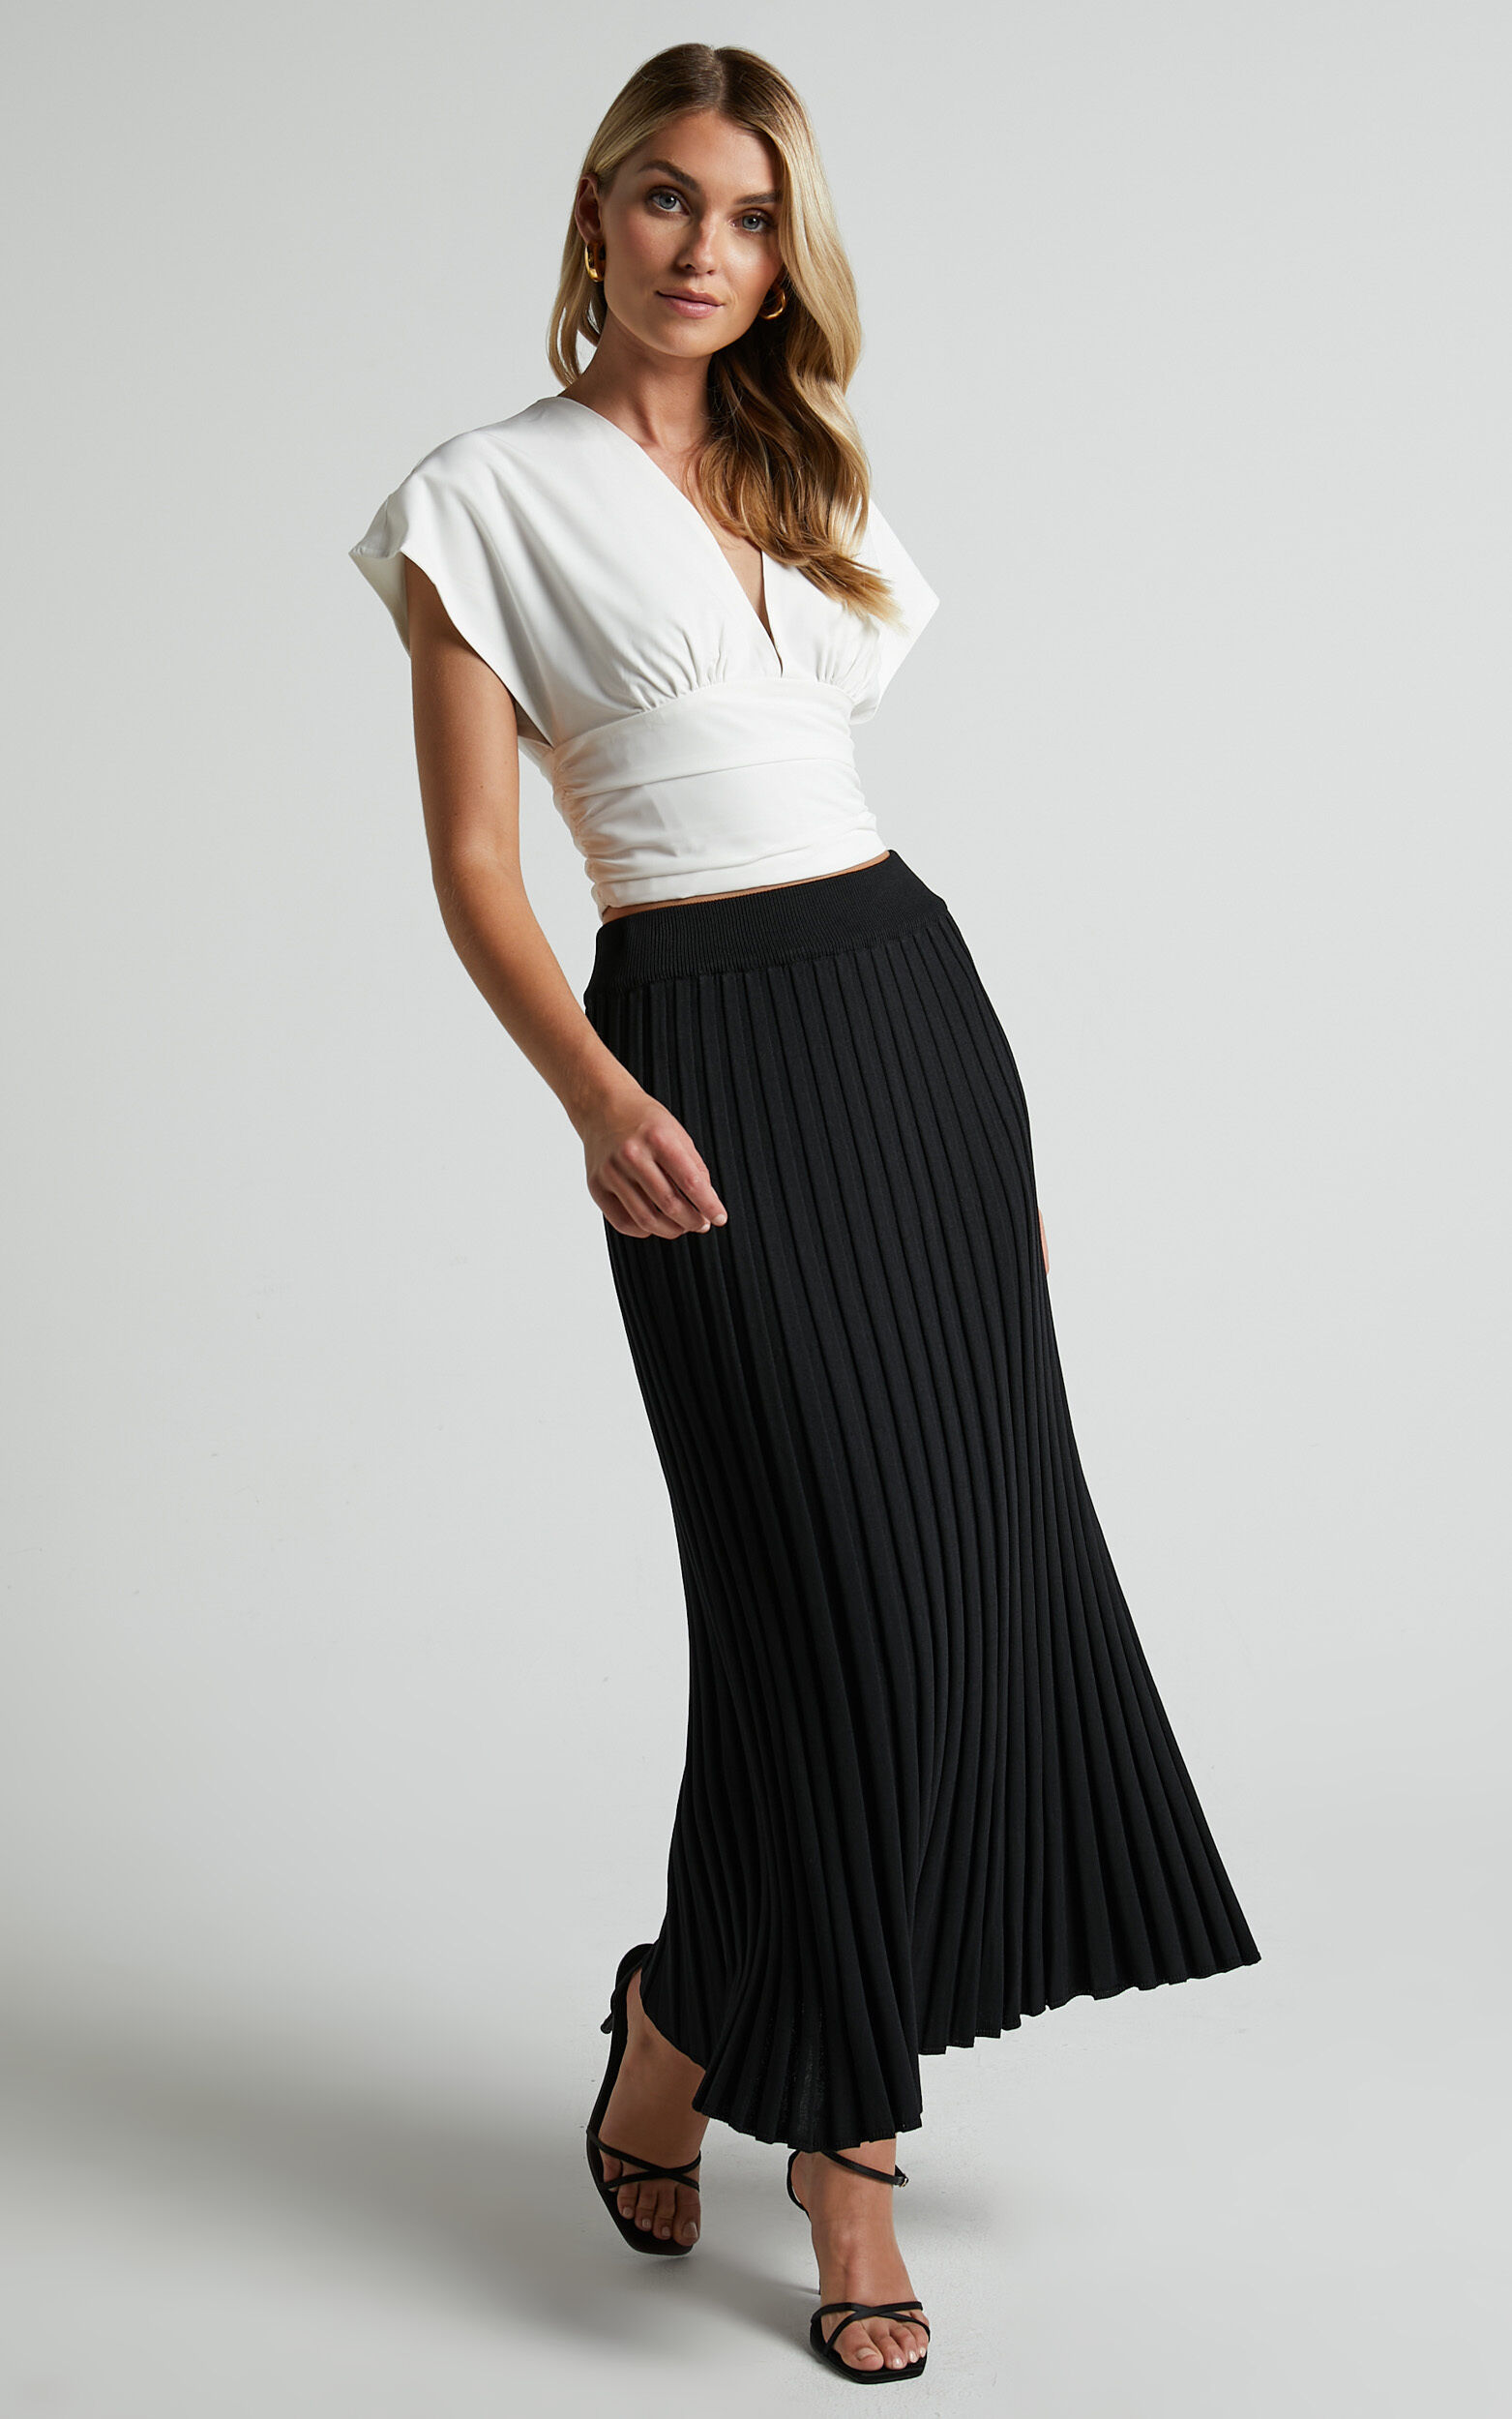 Hadid Midaxi Skirt - High Waisted Knit Skirt in Black - 06, BLK1